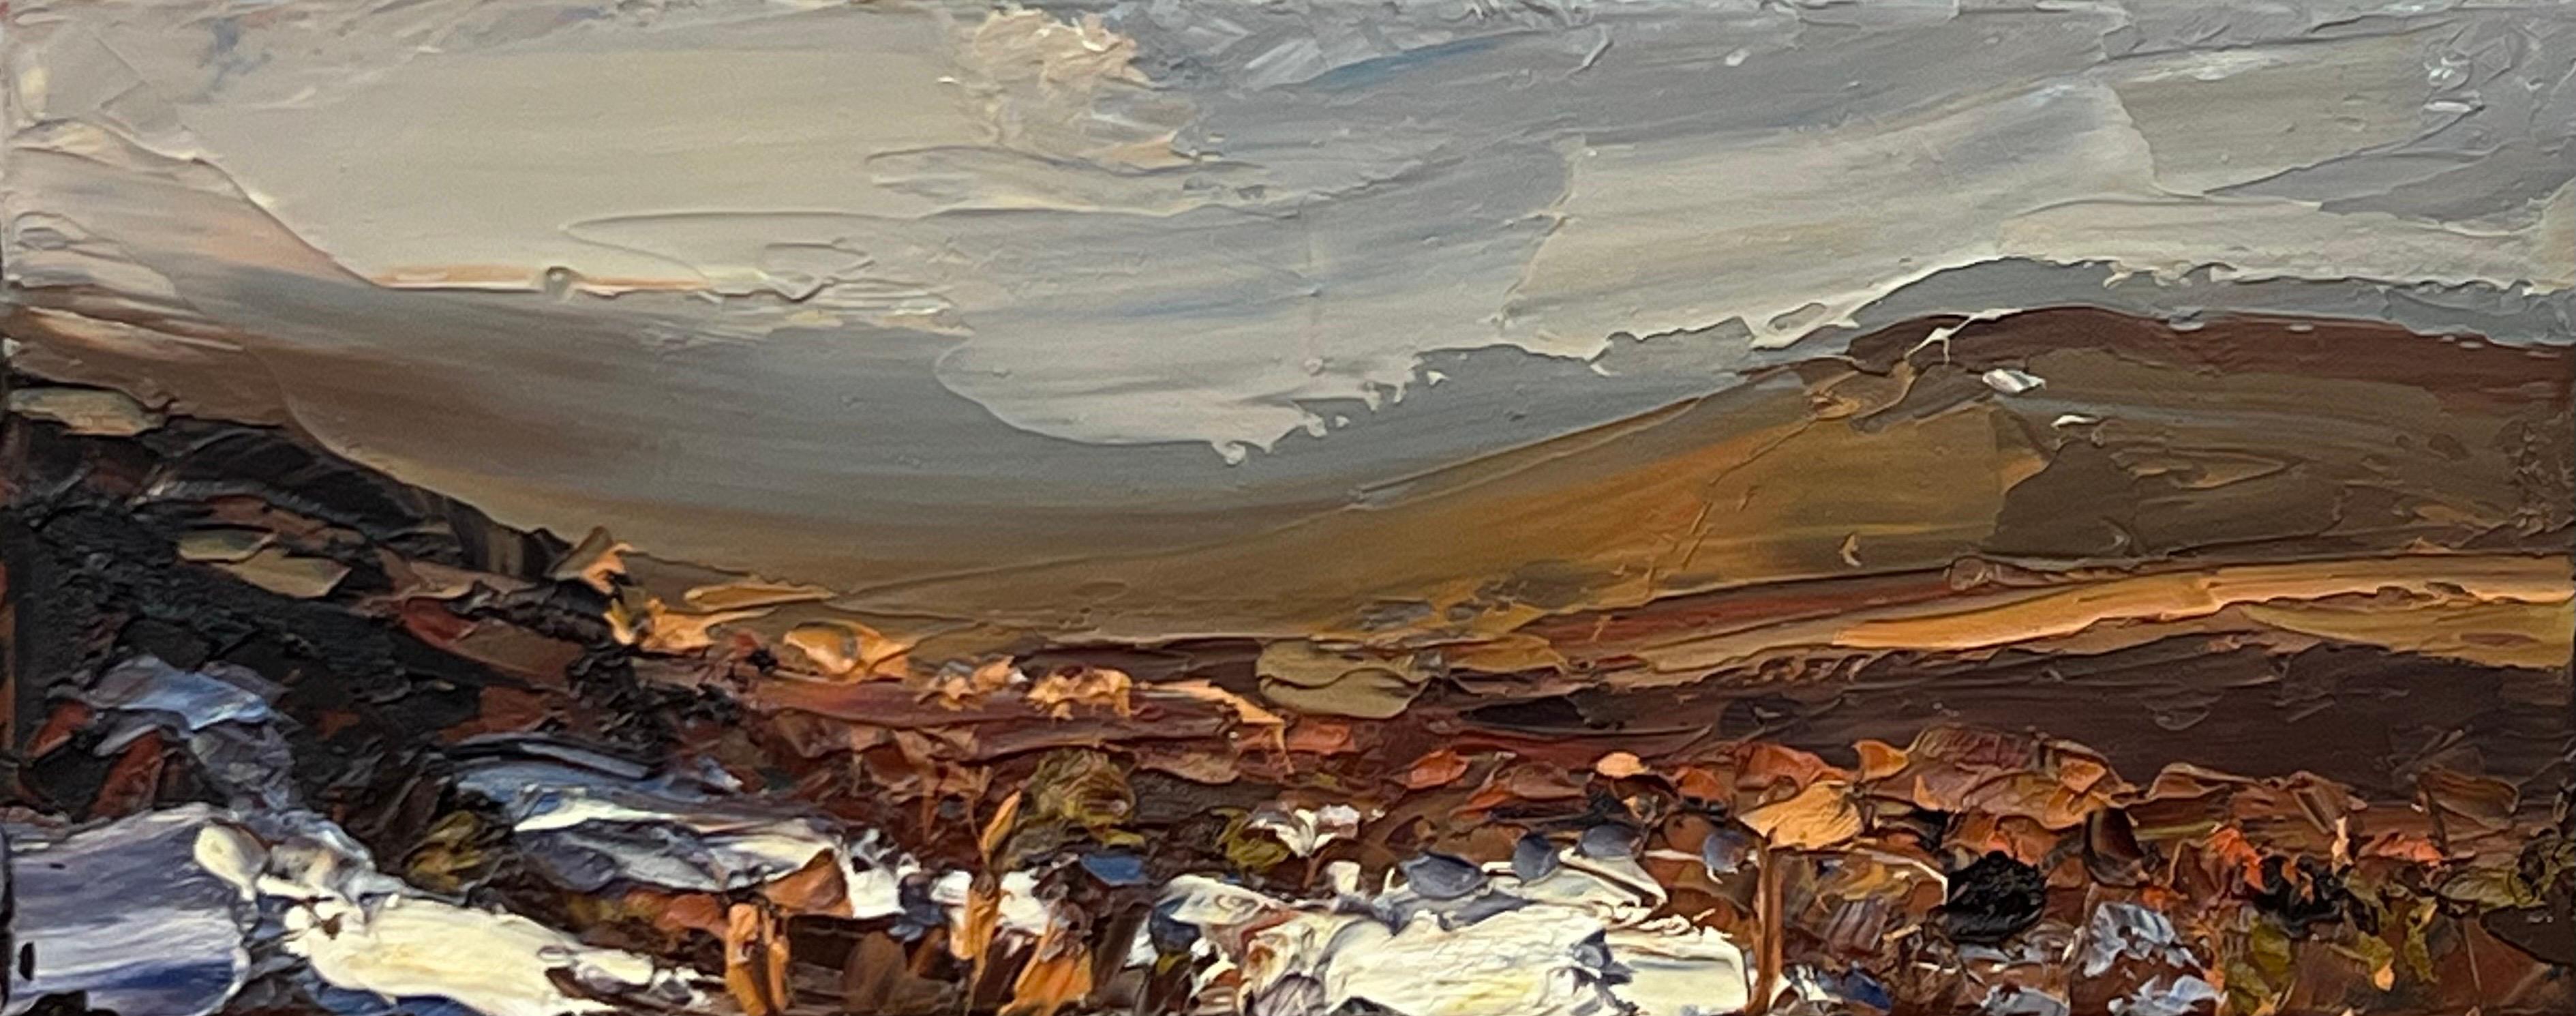 Impasto Oil Painting of Melting Snow on English Moor Landscape by British Artist For Sale 4